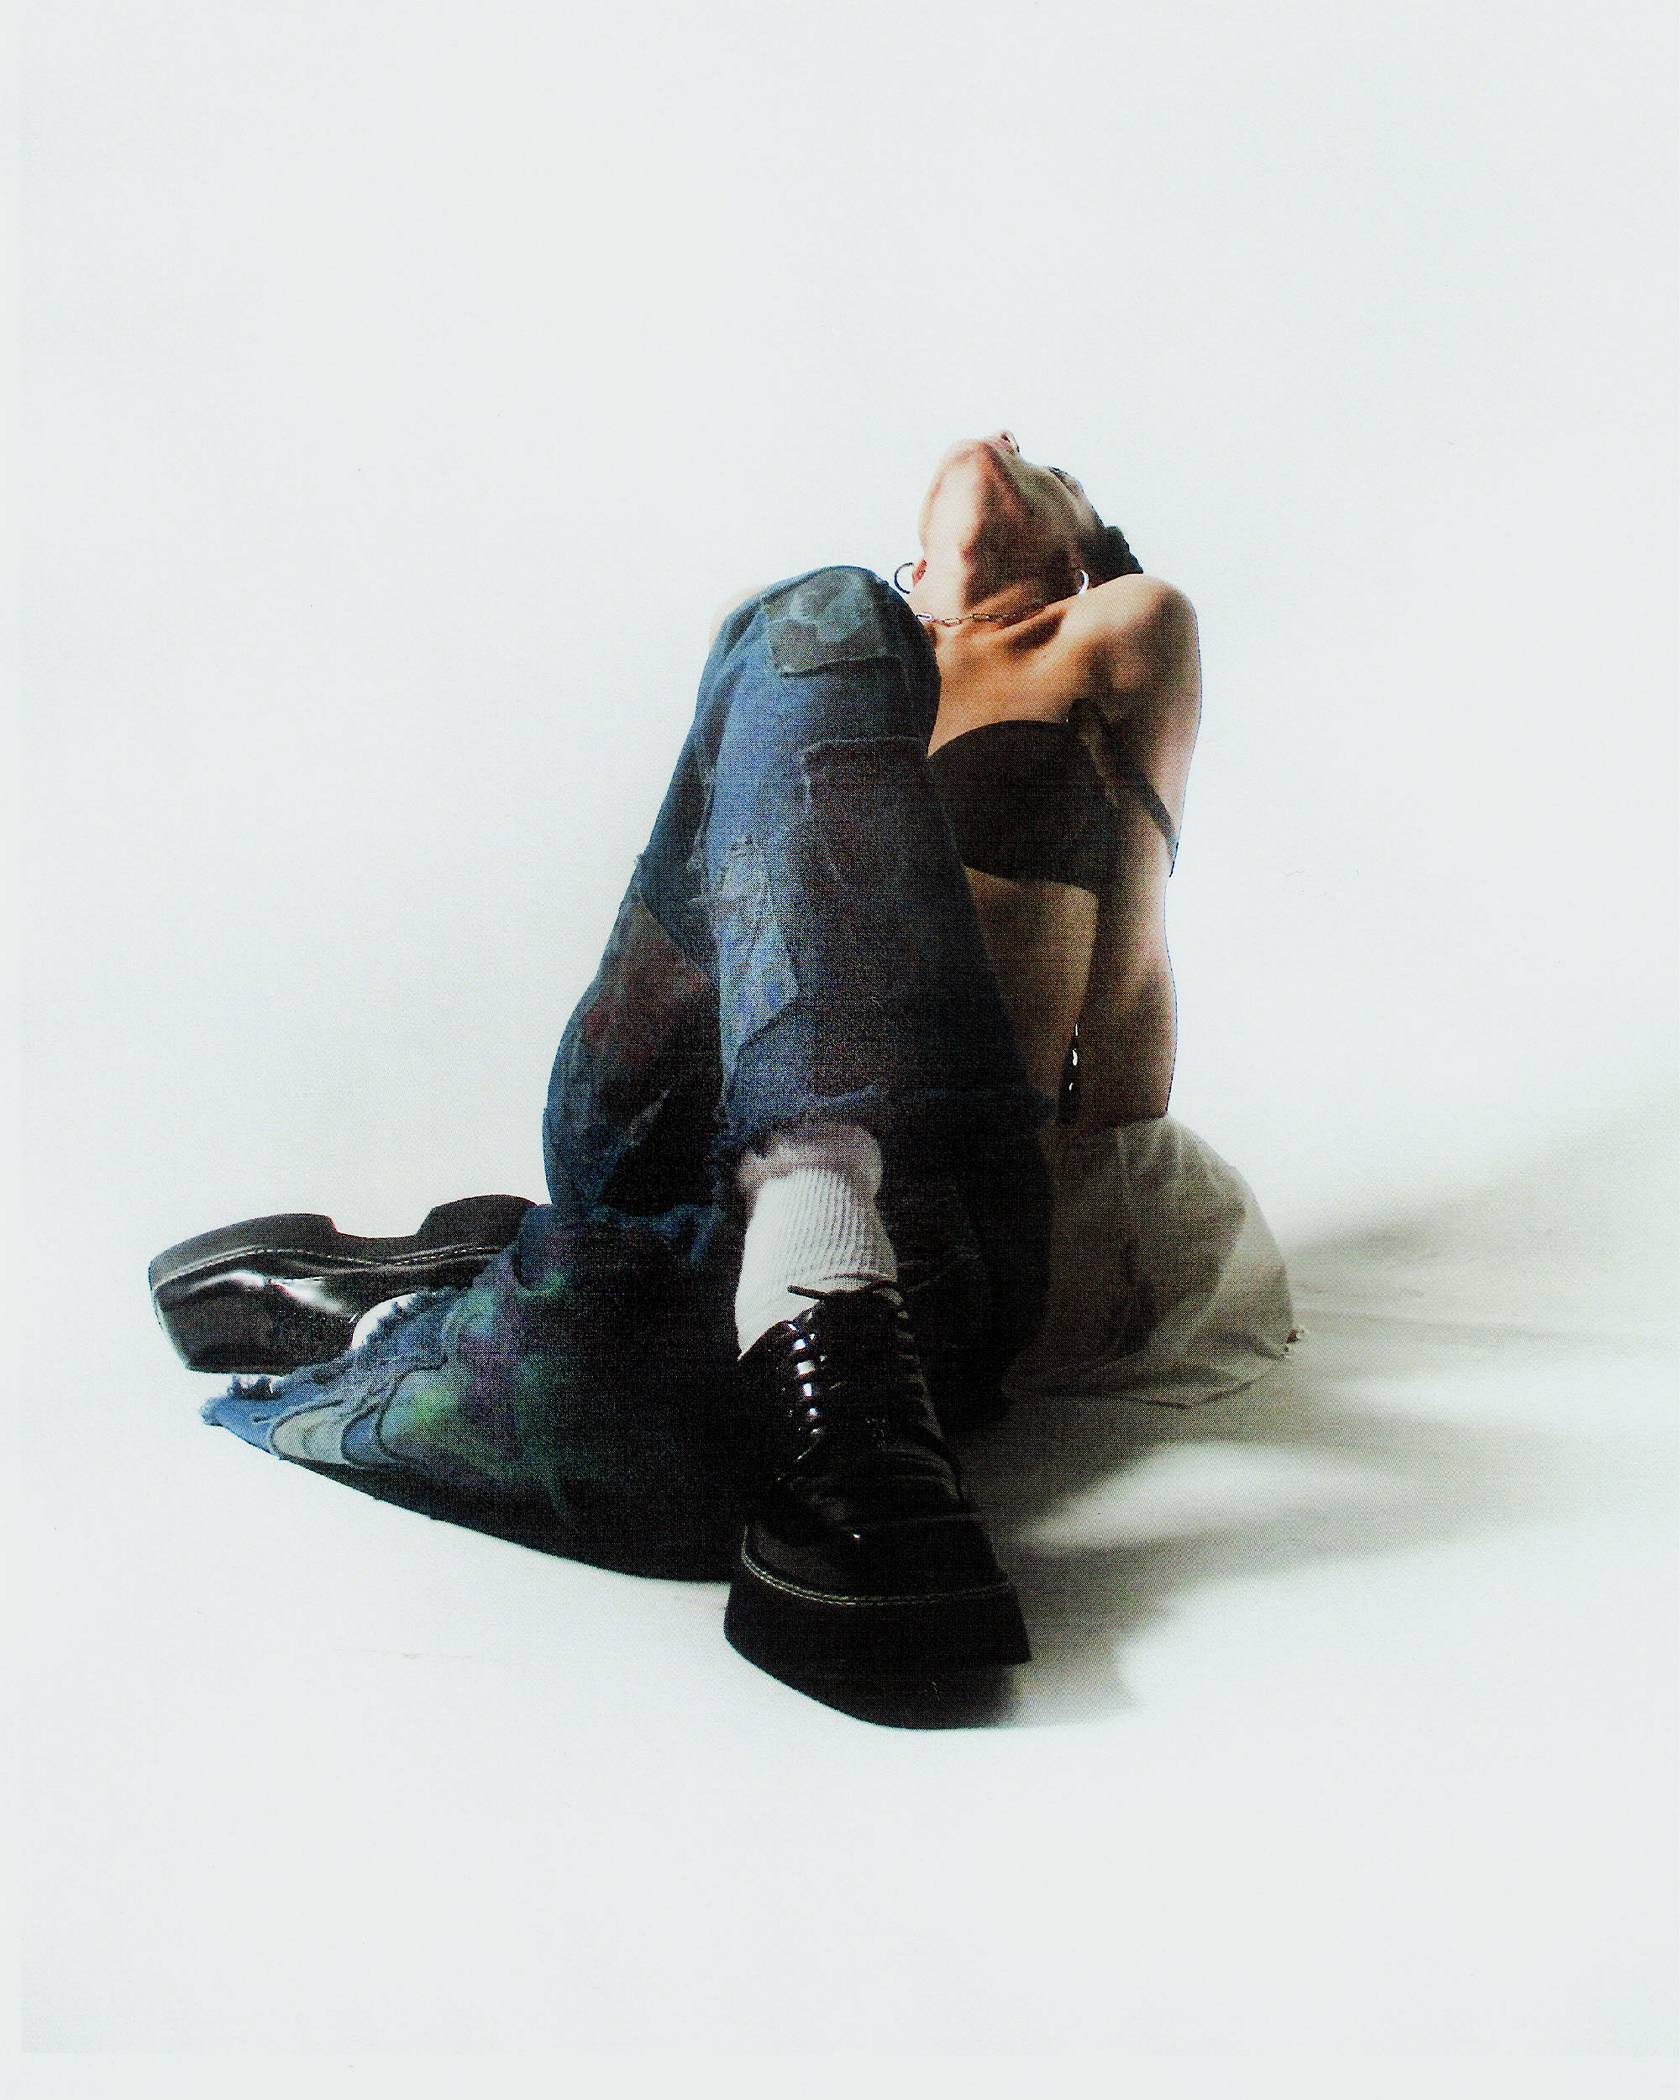 Model sitting on the floor with legs crossed in the blue colored collab jeans and black bra